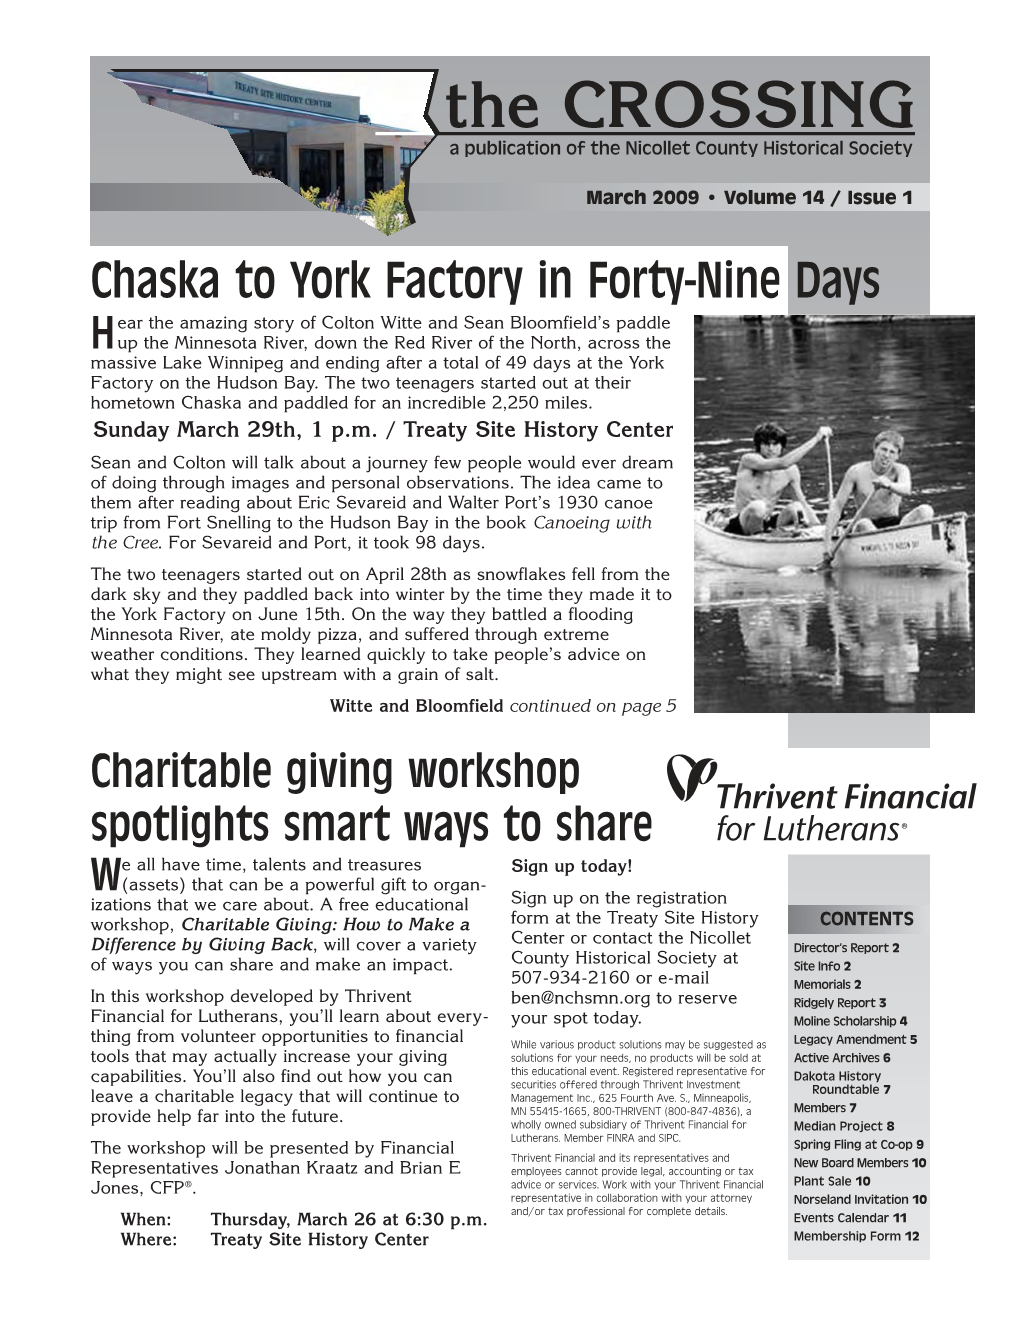 Chaska to York Factory in Forty-Nine Days